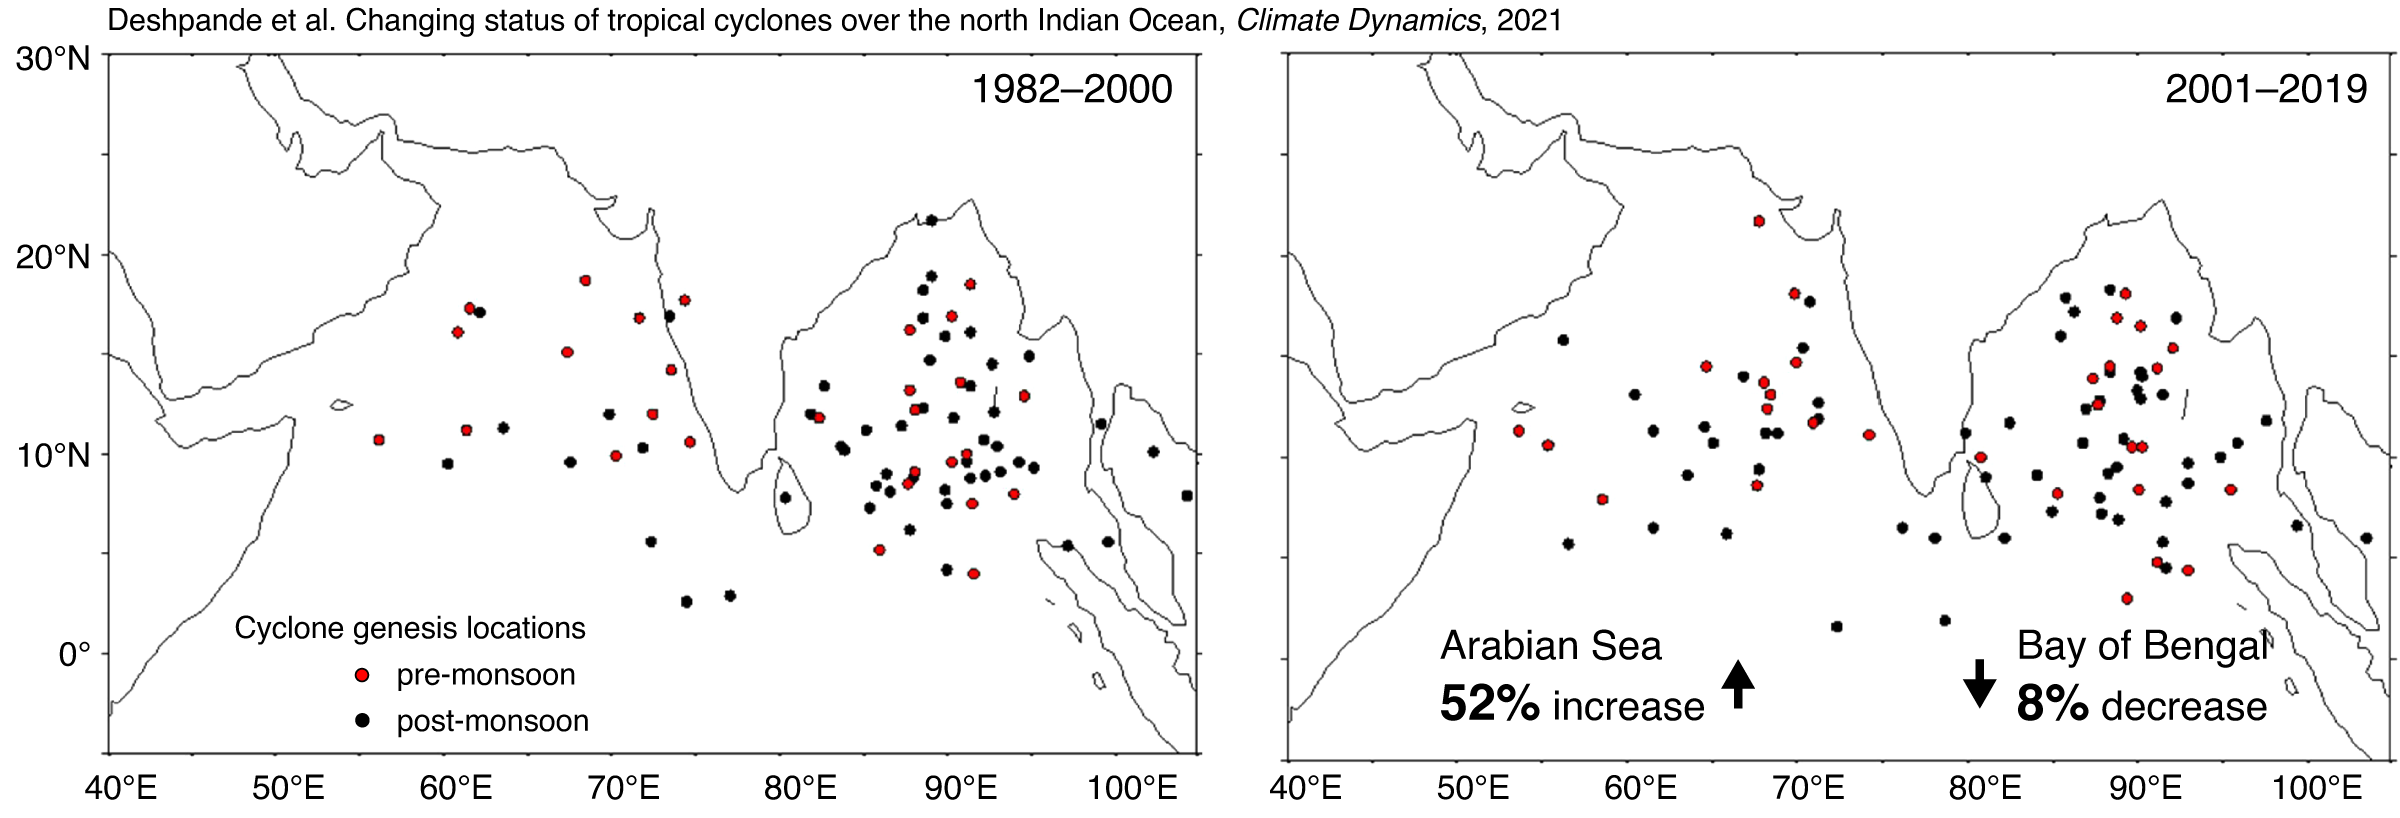 changes in the frequency of cyclones in the north Indian Ocean